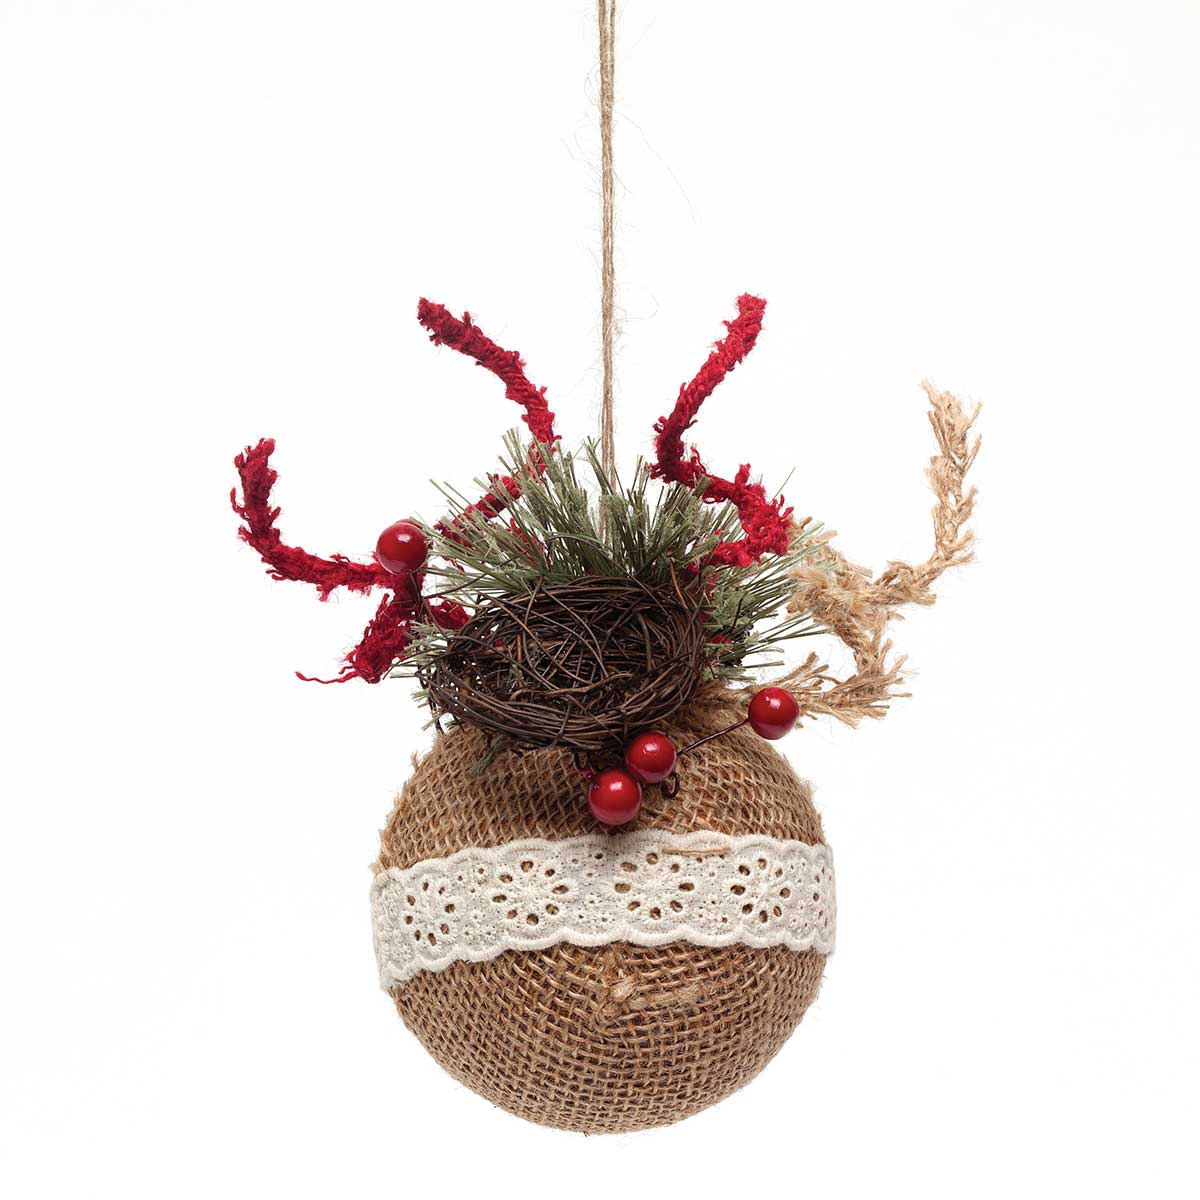 BURLAP BALL ORNAMENT WITH NEST AND BERRIES